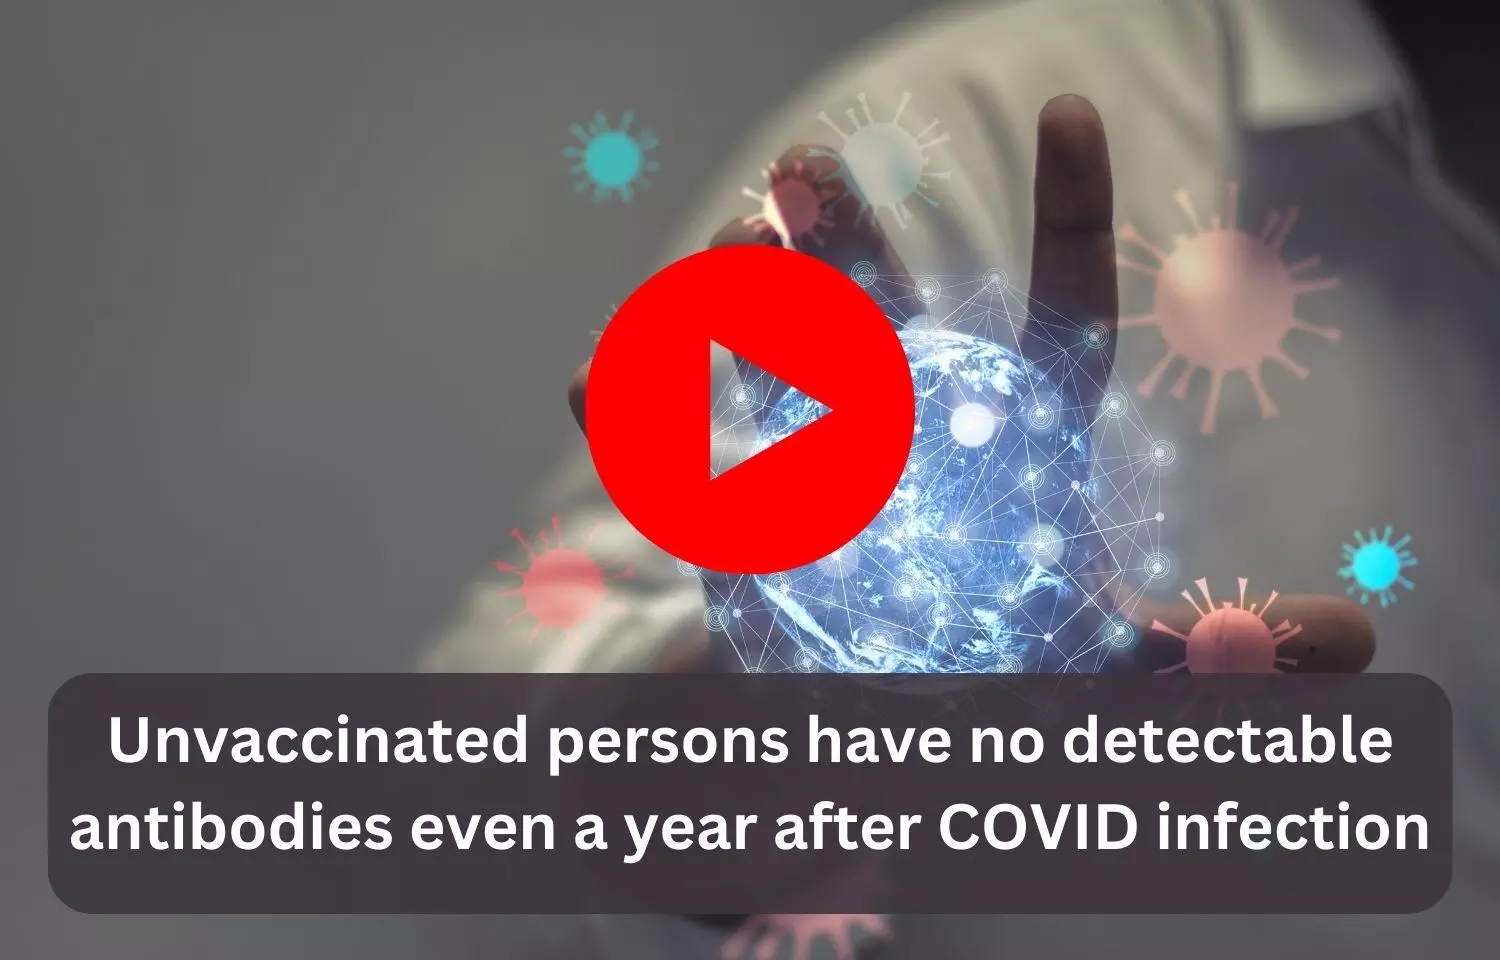 COVID-19: One in three infected but unvaccinated persons no longer have detectable antibodies one year after the infection